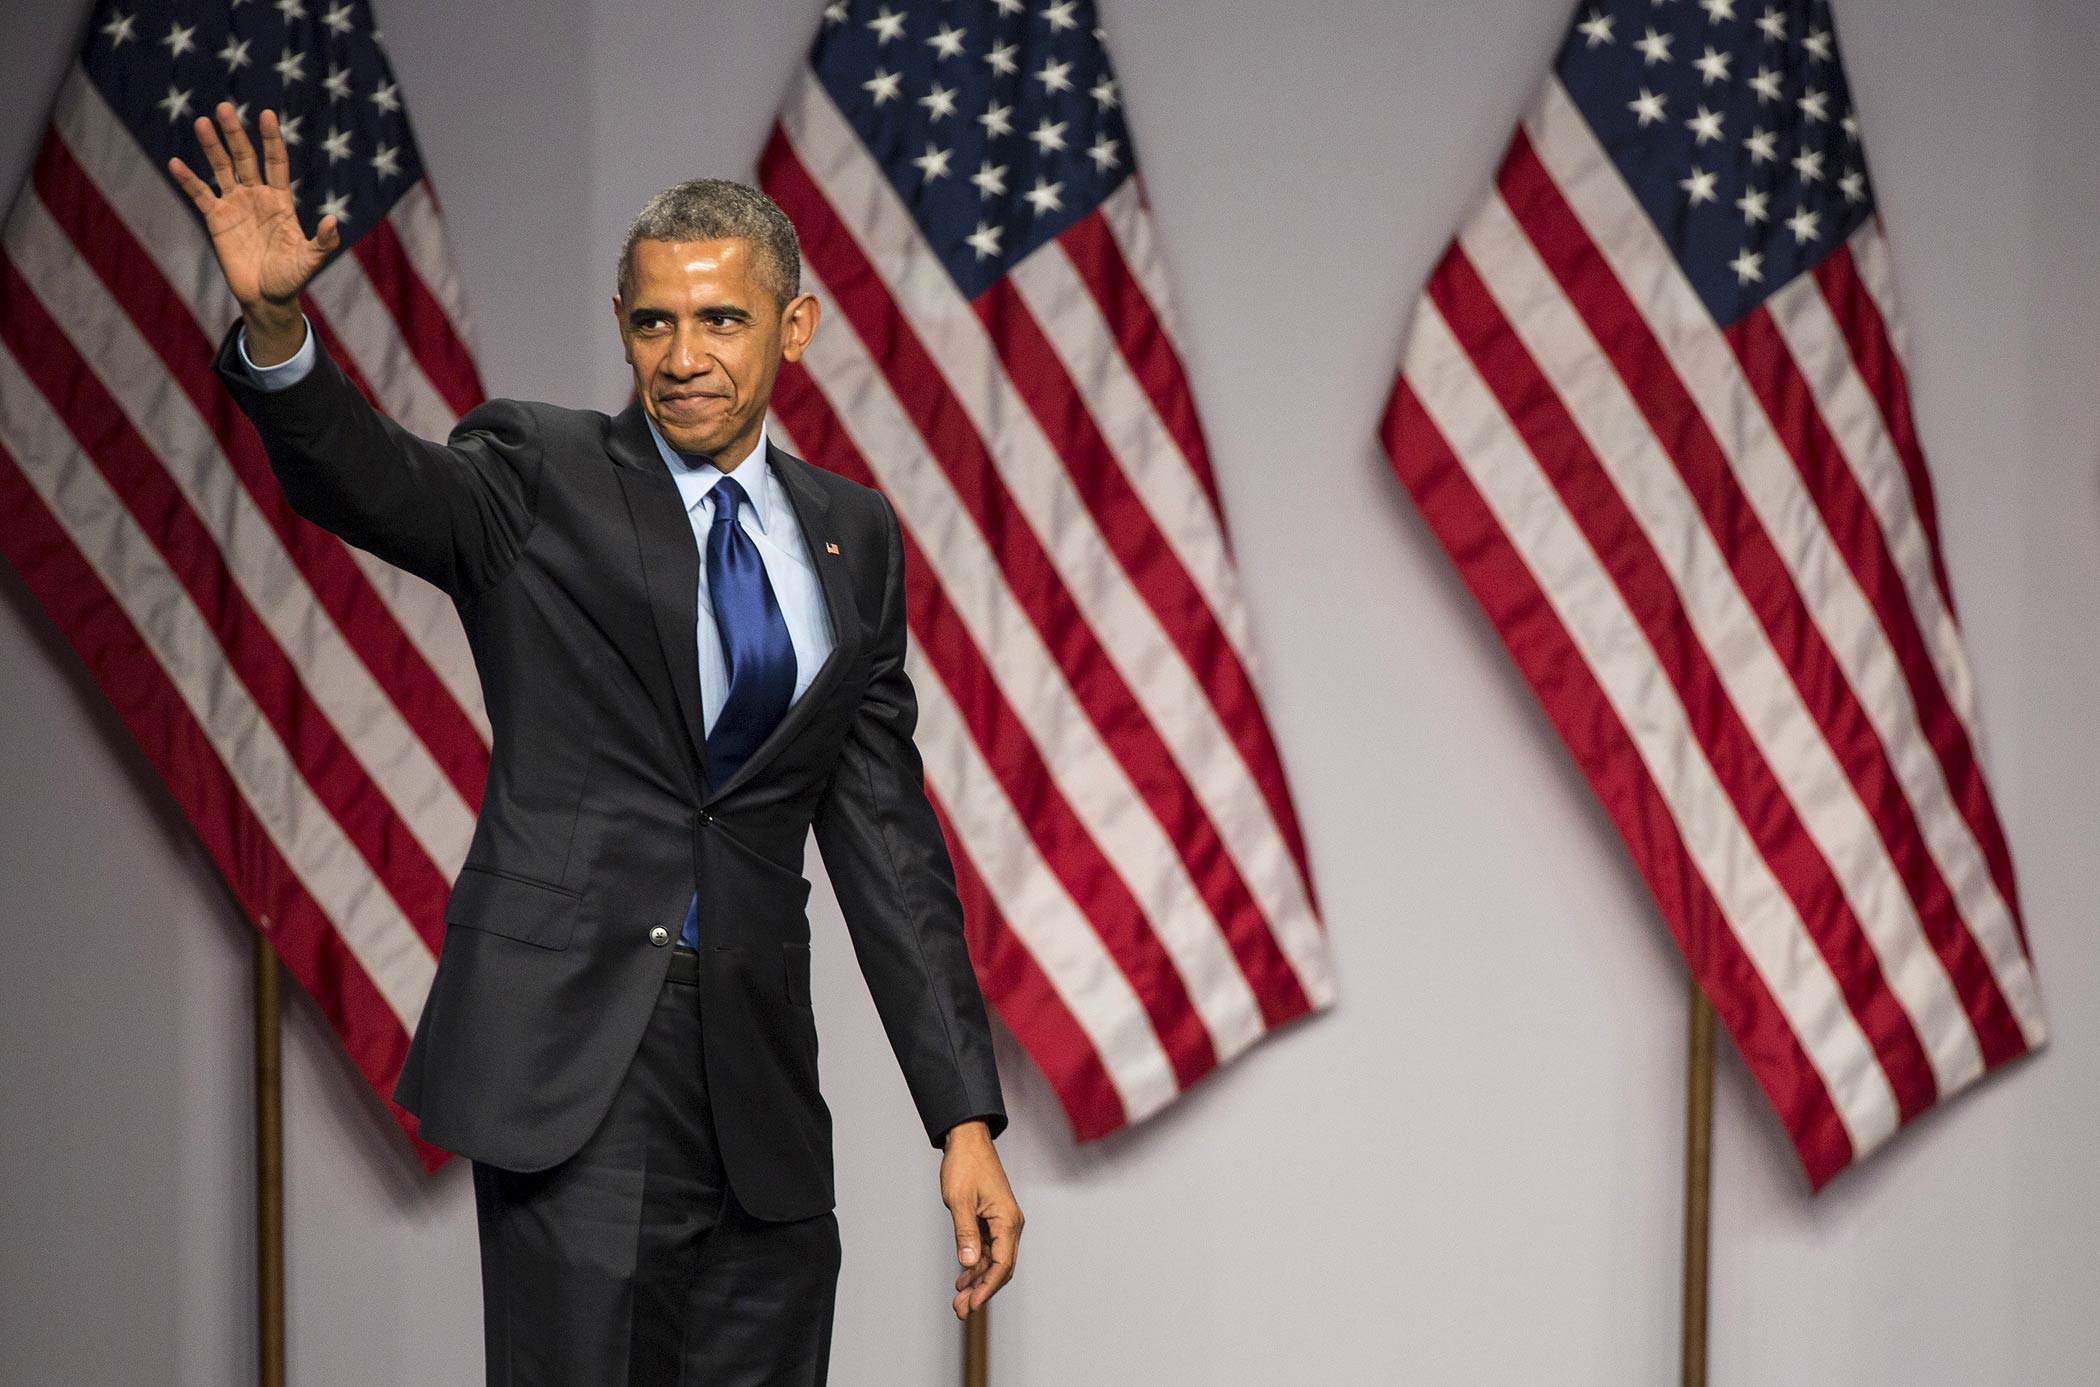 U.S. President Obama waves after speaking at the SelectUSA Investment Summit